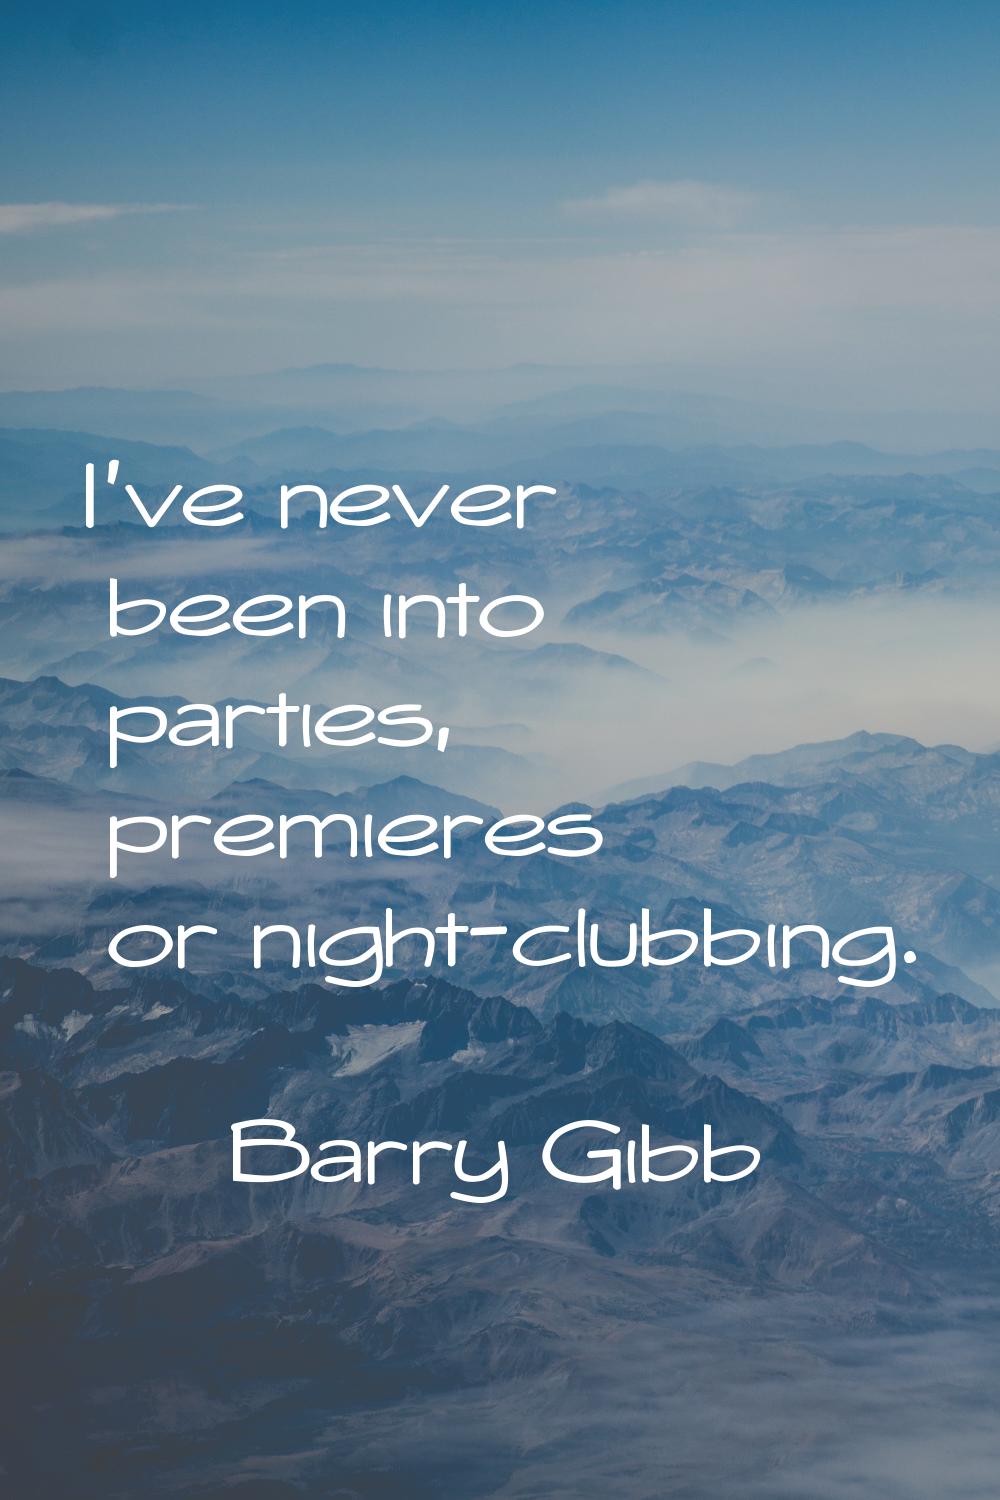 I've never been into parties, premieres or night-clubbing.